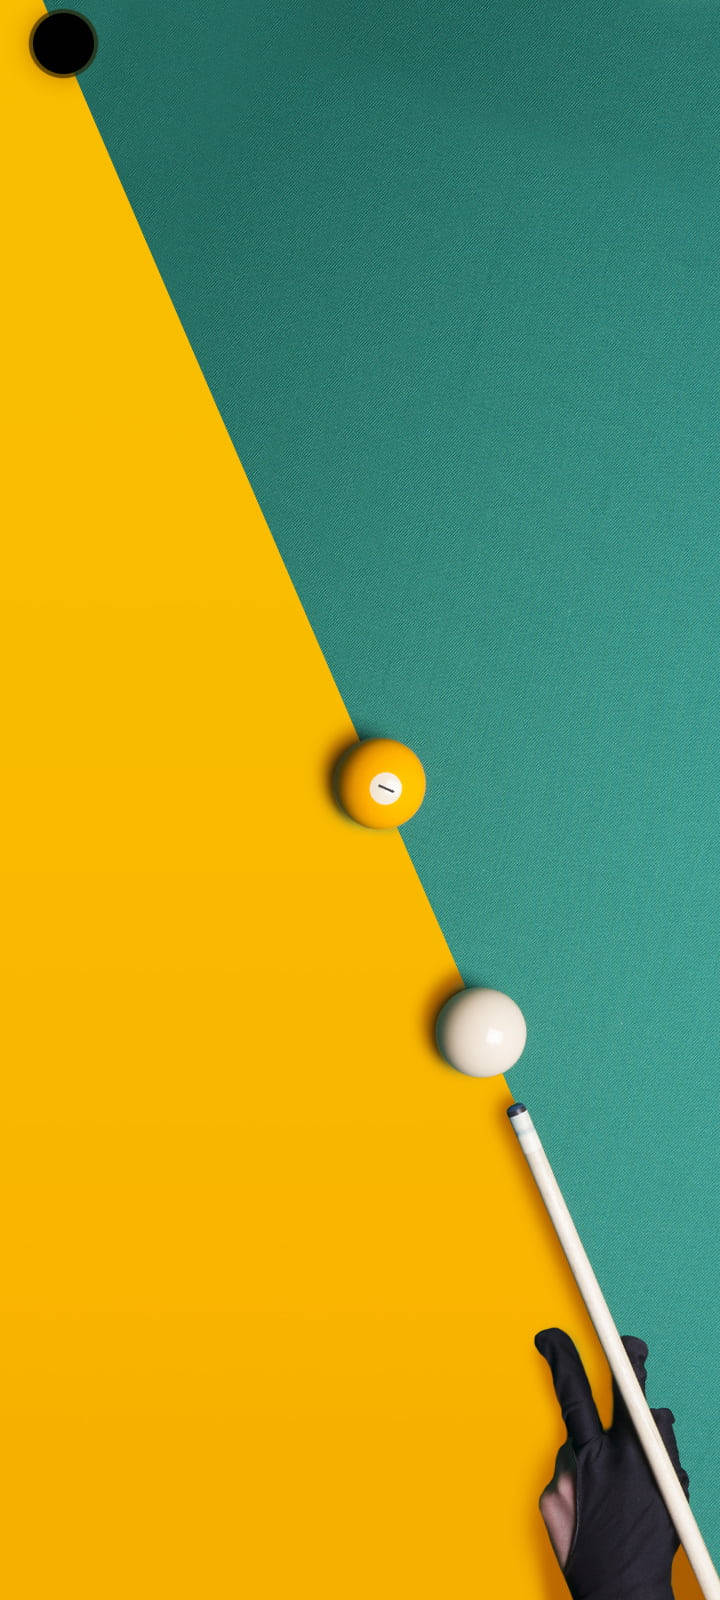 Snooker Game Punch Hole 4K Wallpaper